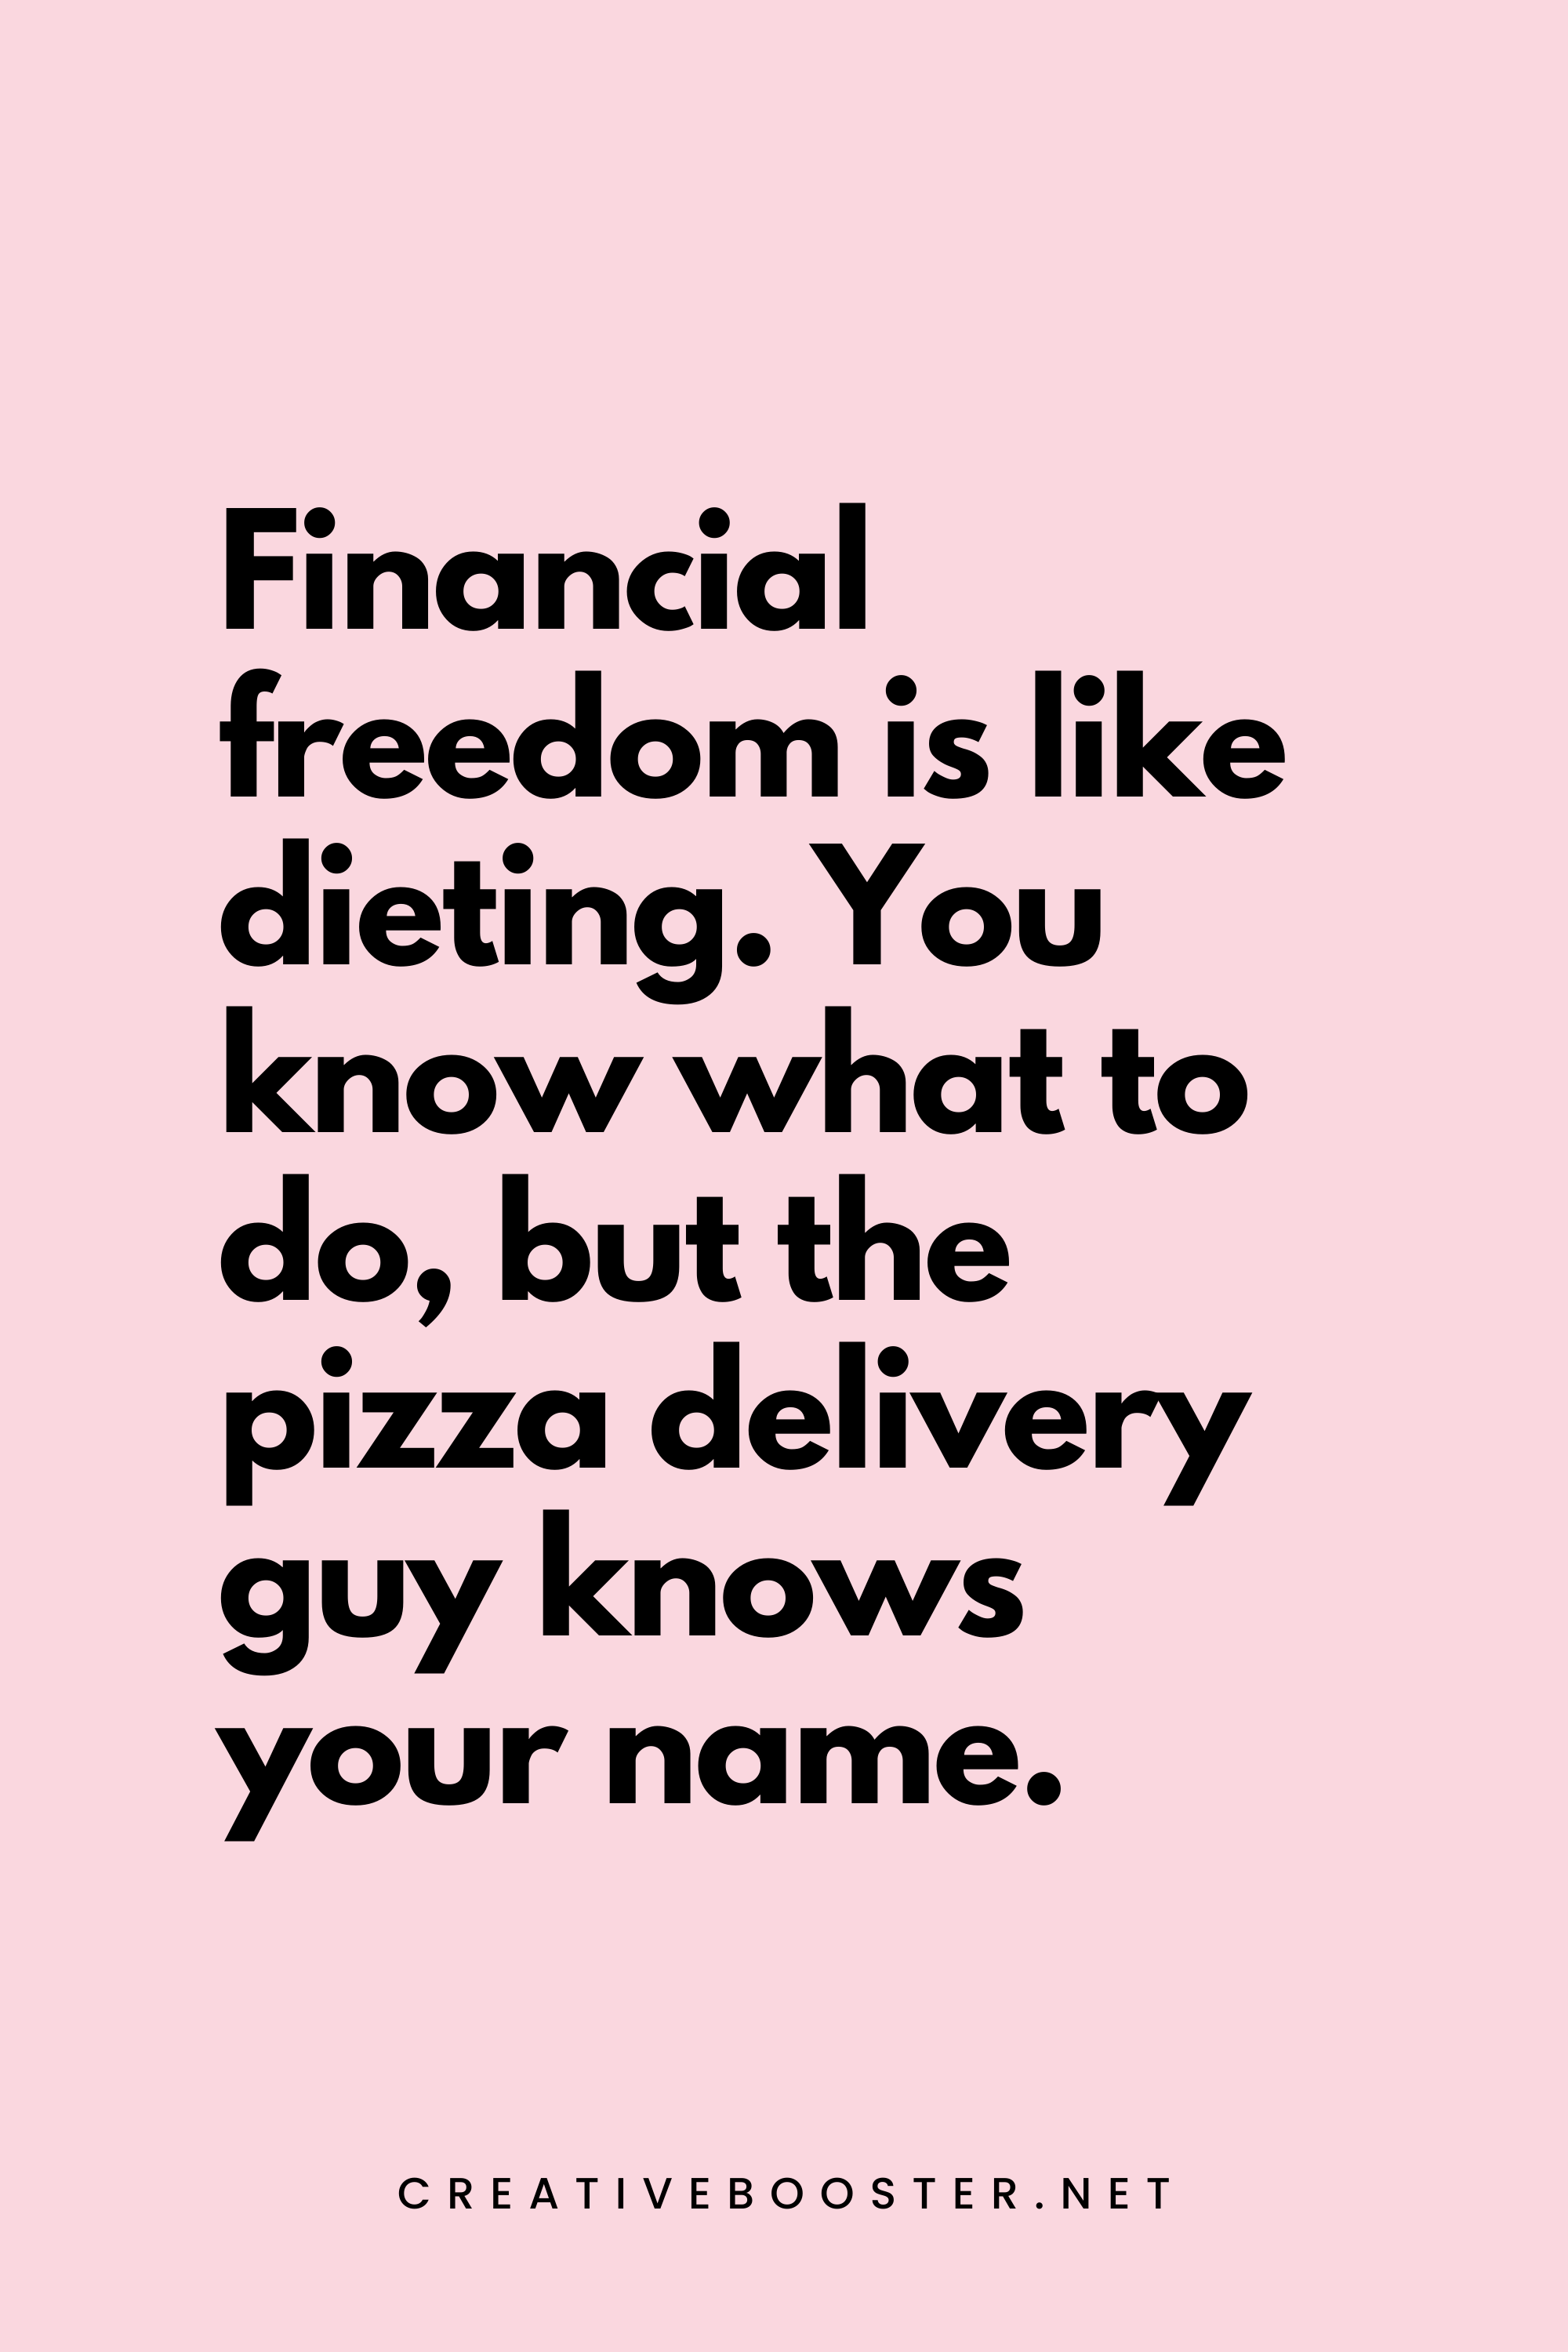 57. Financial freedom is like dieting. You know what to do, but the pizza delivery guy knows your name. - Creativebooster.net - 6. Funny Financial Freedom Quotes